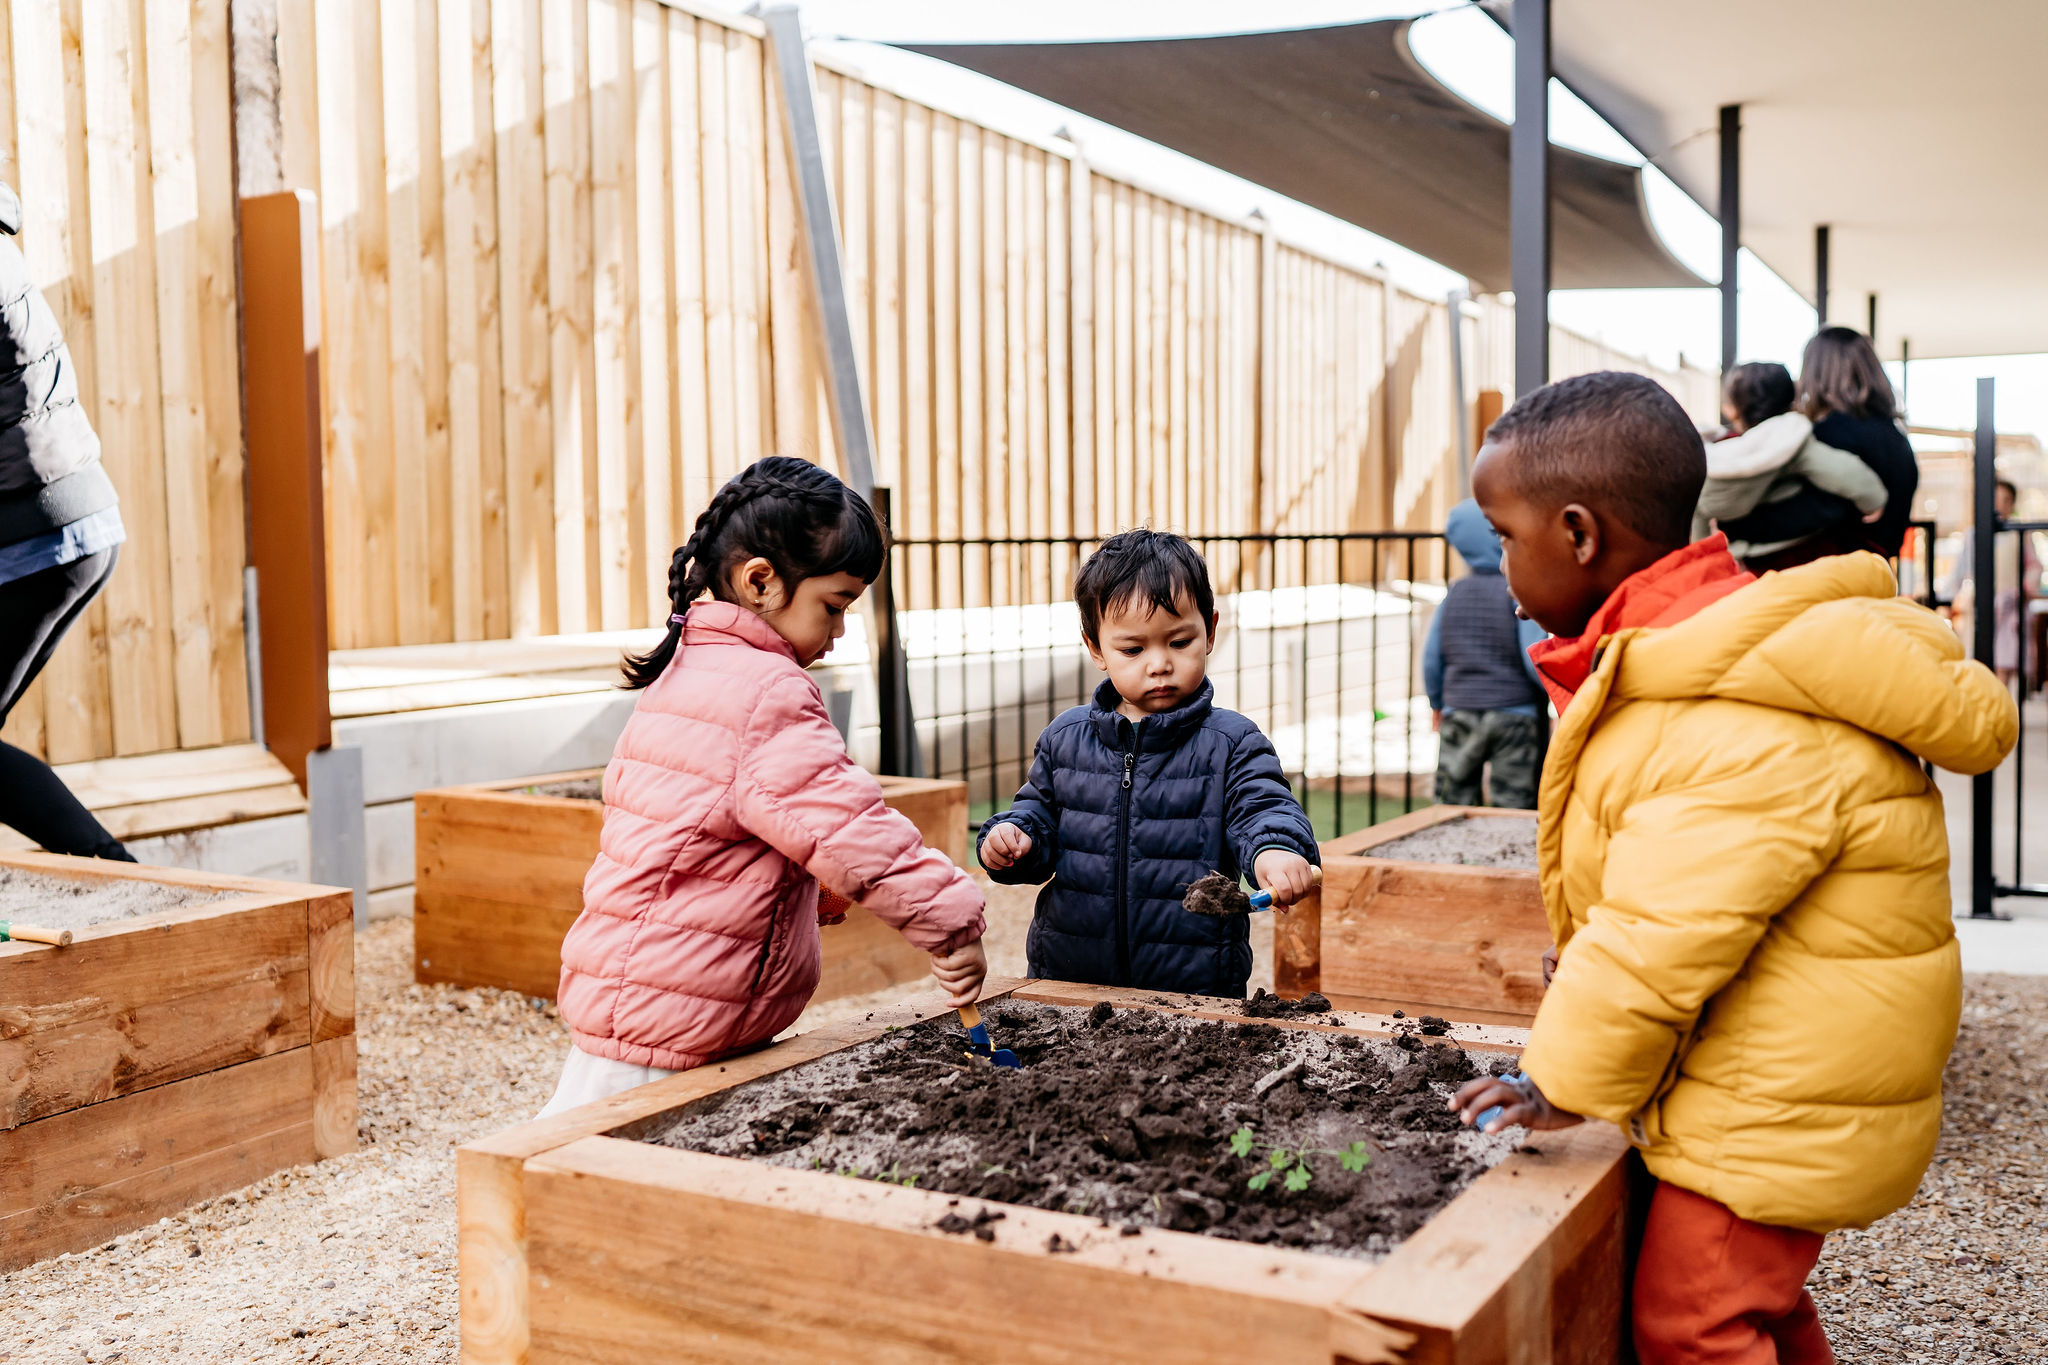 3 kids at Child's Play Early Learning Centre playing and learning in the veggie garden area